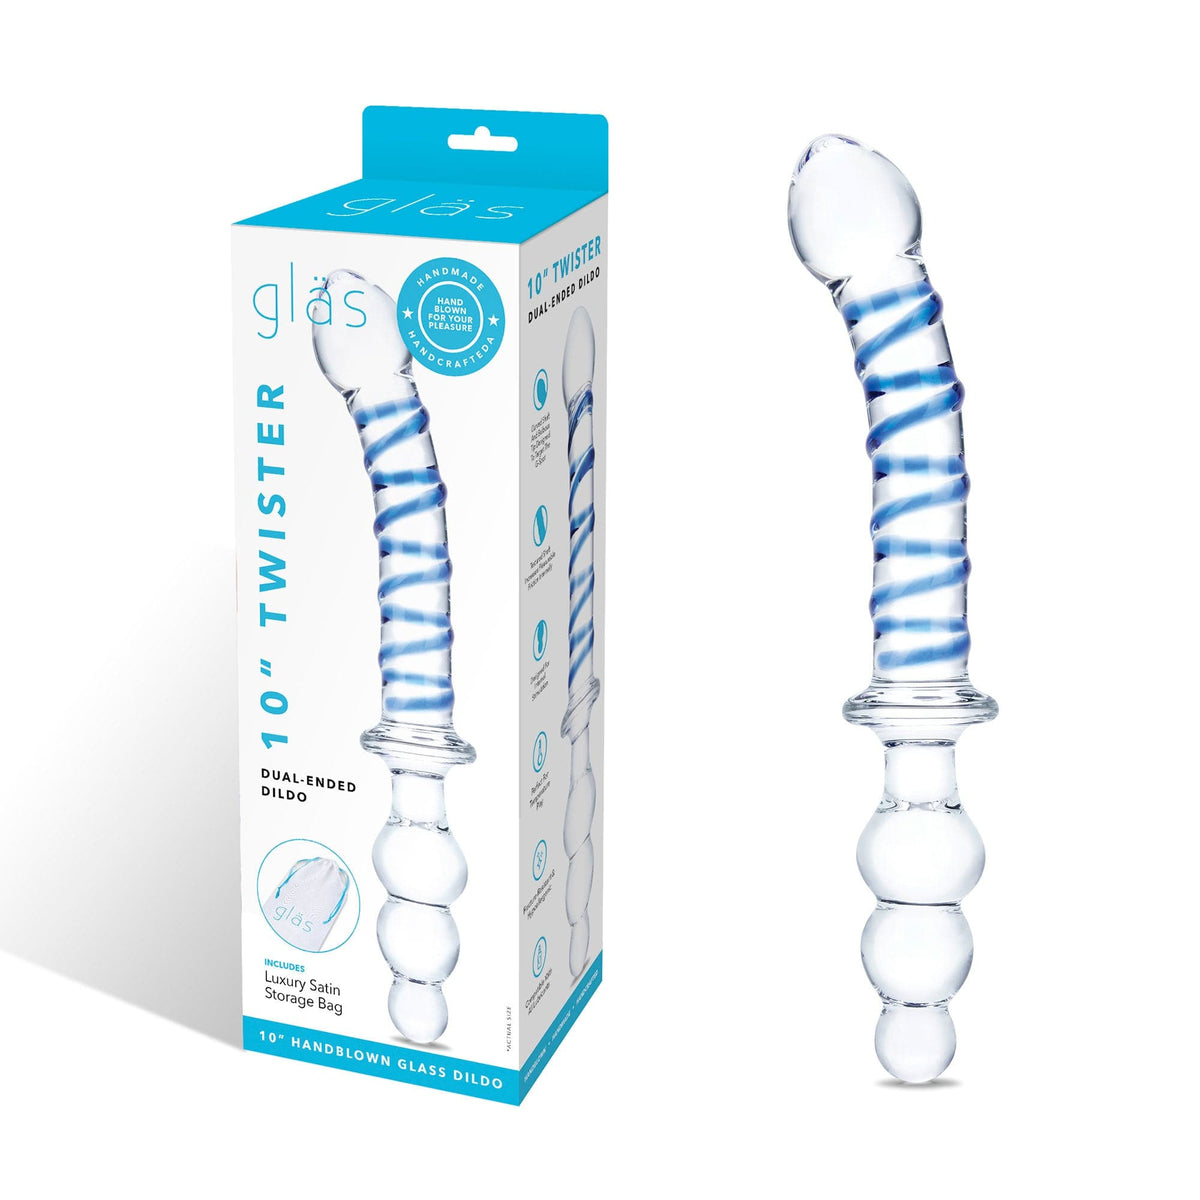 10 inch twister dual ended dildo clear blue